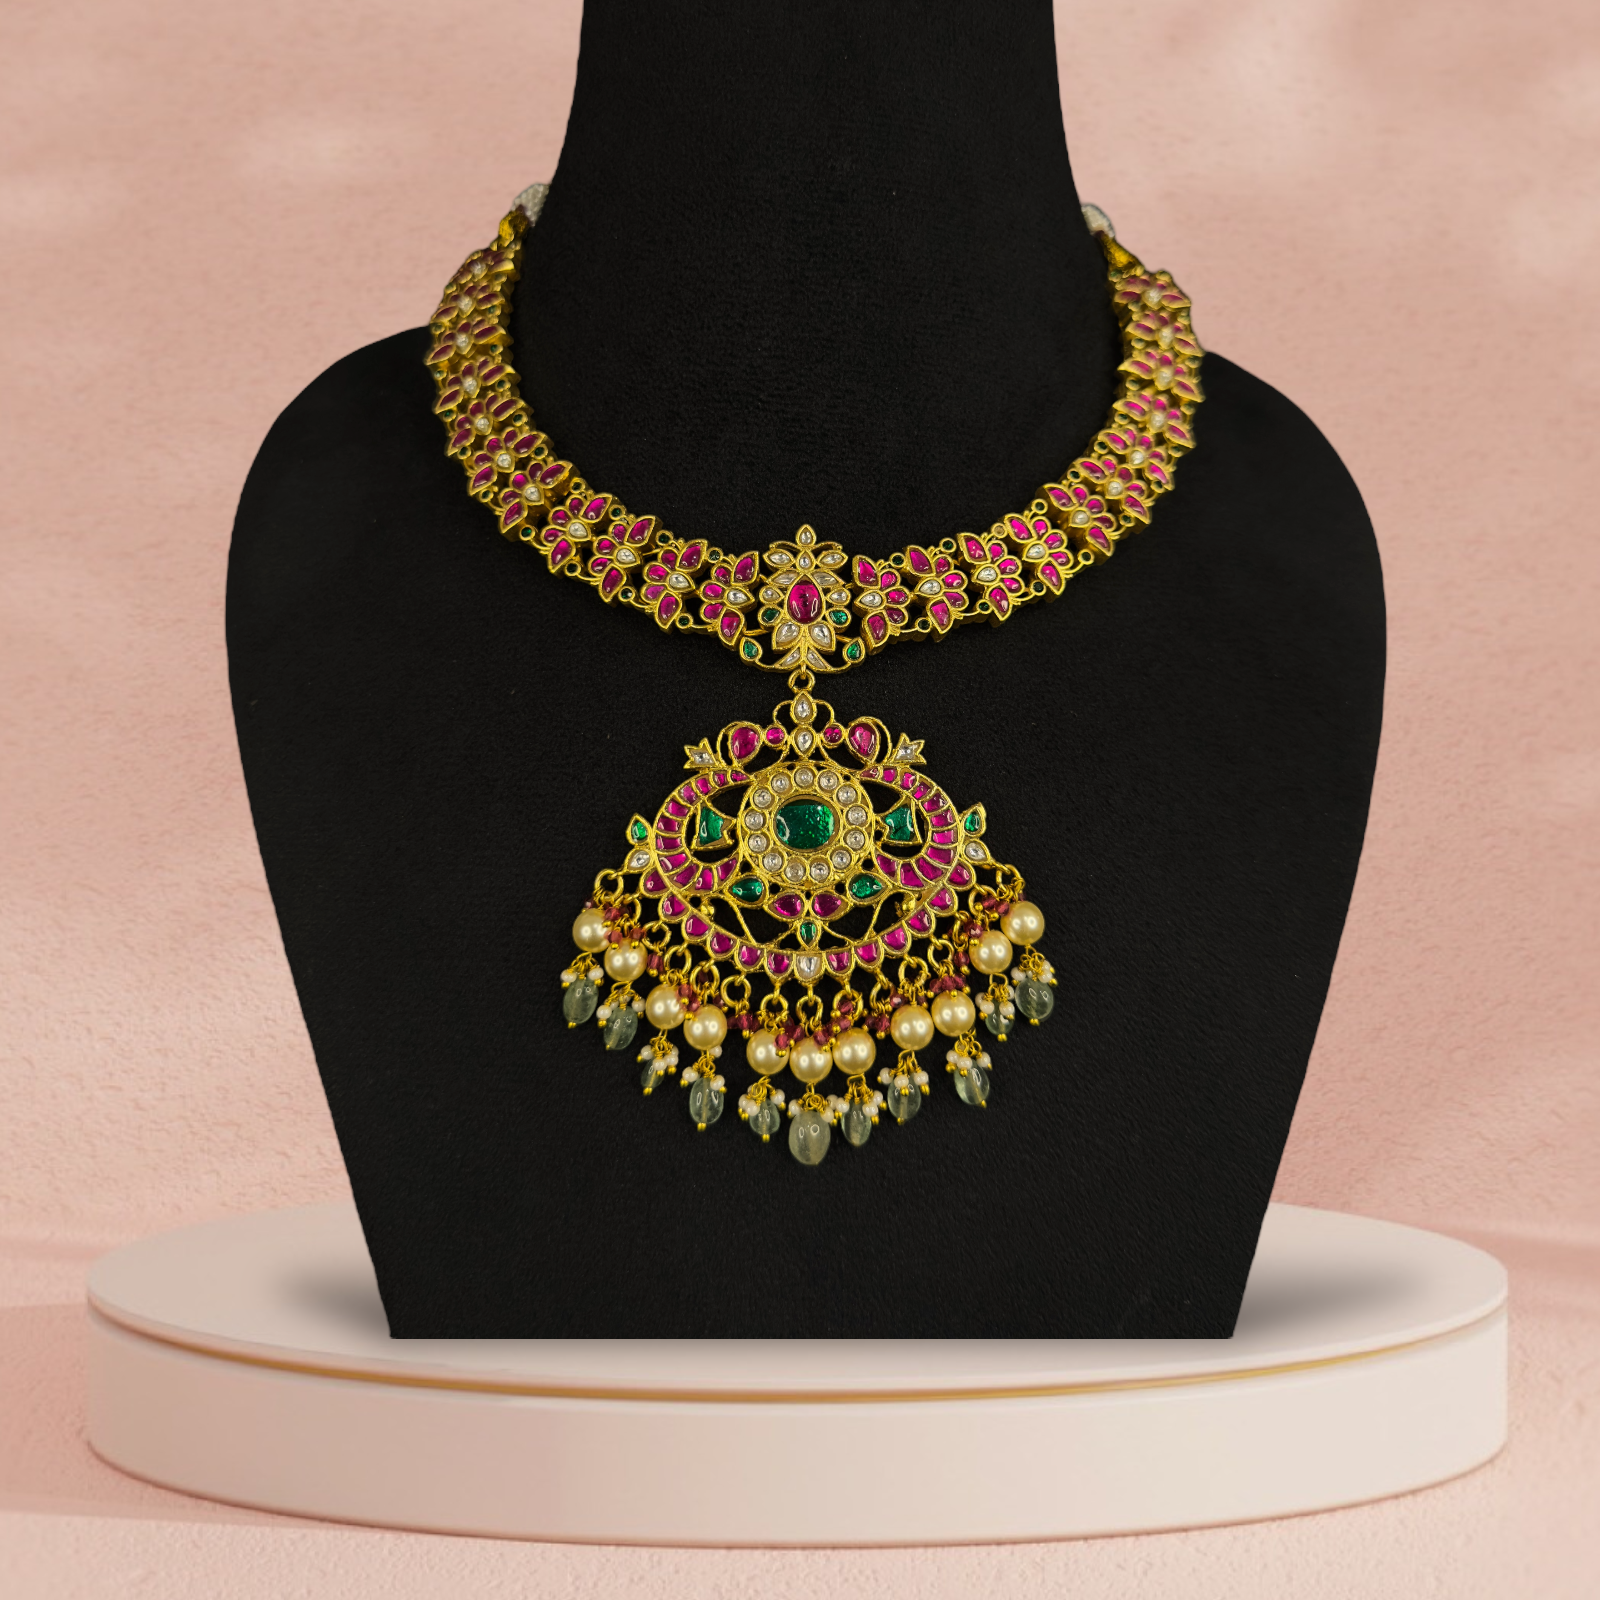 "Ornate Splendor: Exquisite Jadau Kundan Necklace with Pearl Adornments with 22k gold plating This product belongs to jadau kundan jewellery category